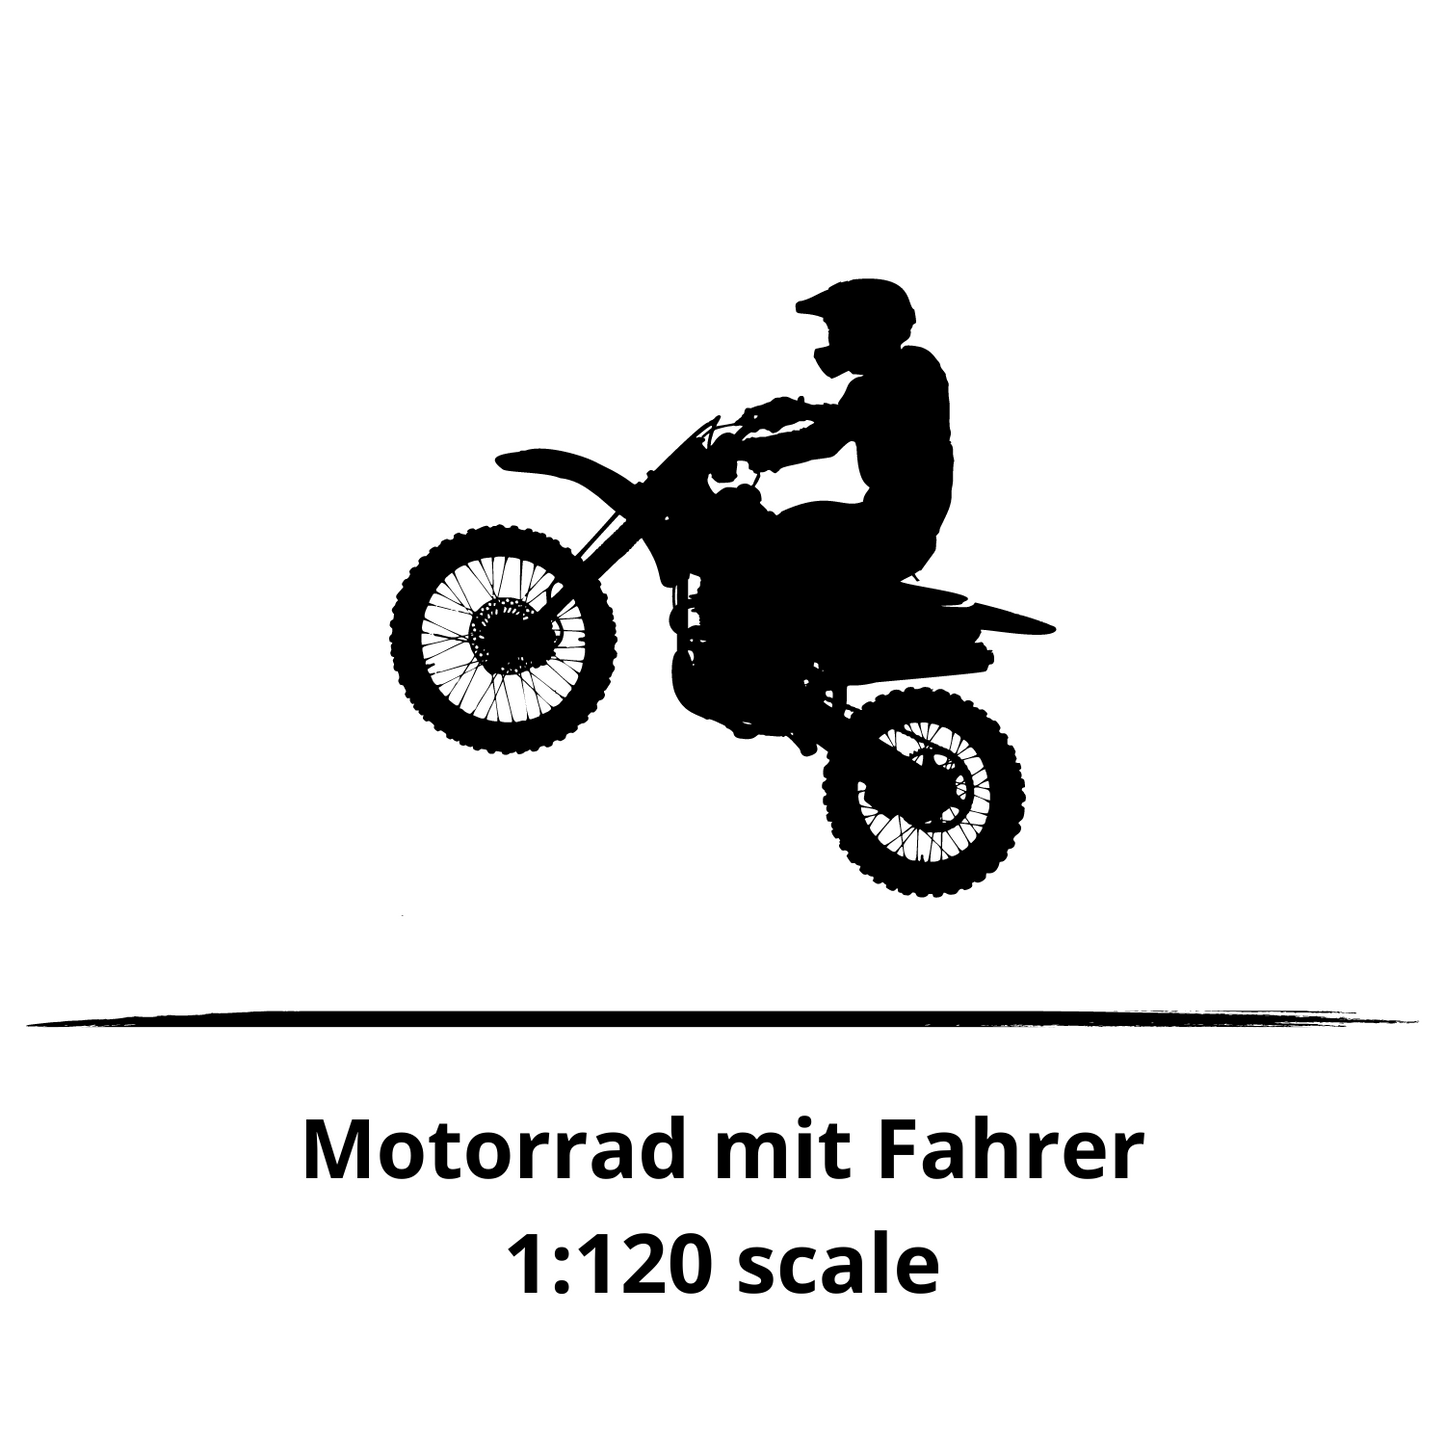 1:120 motorcycle with driver